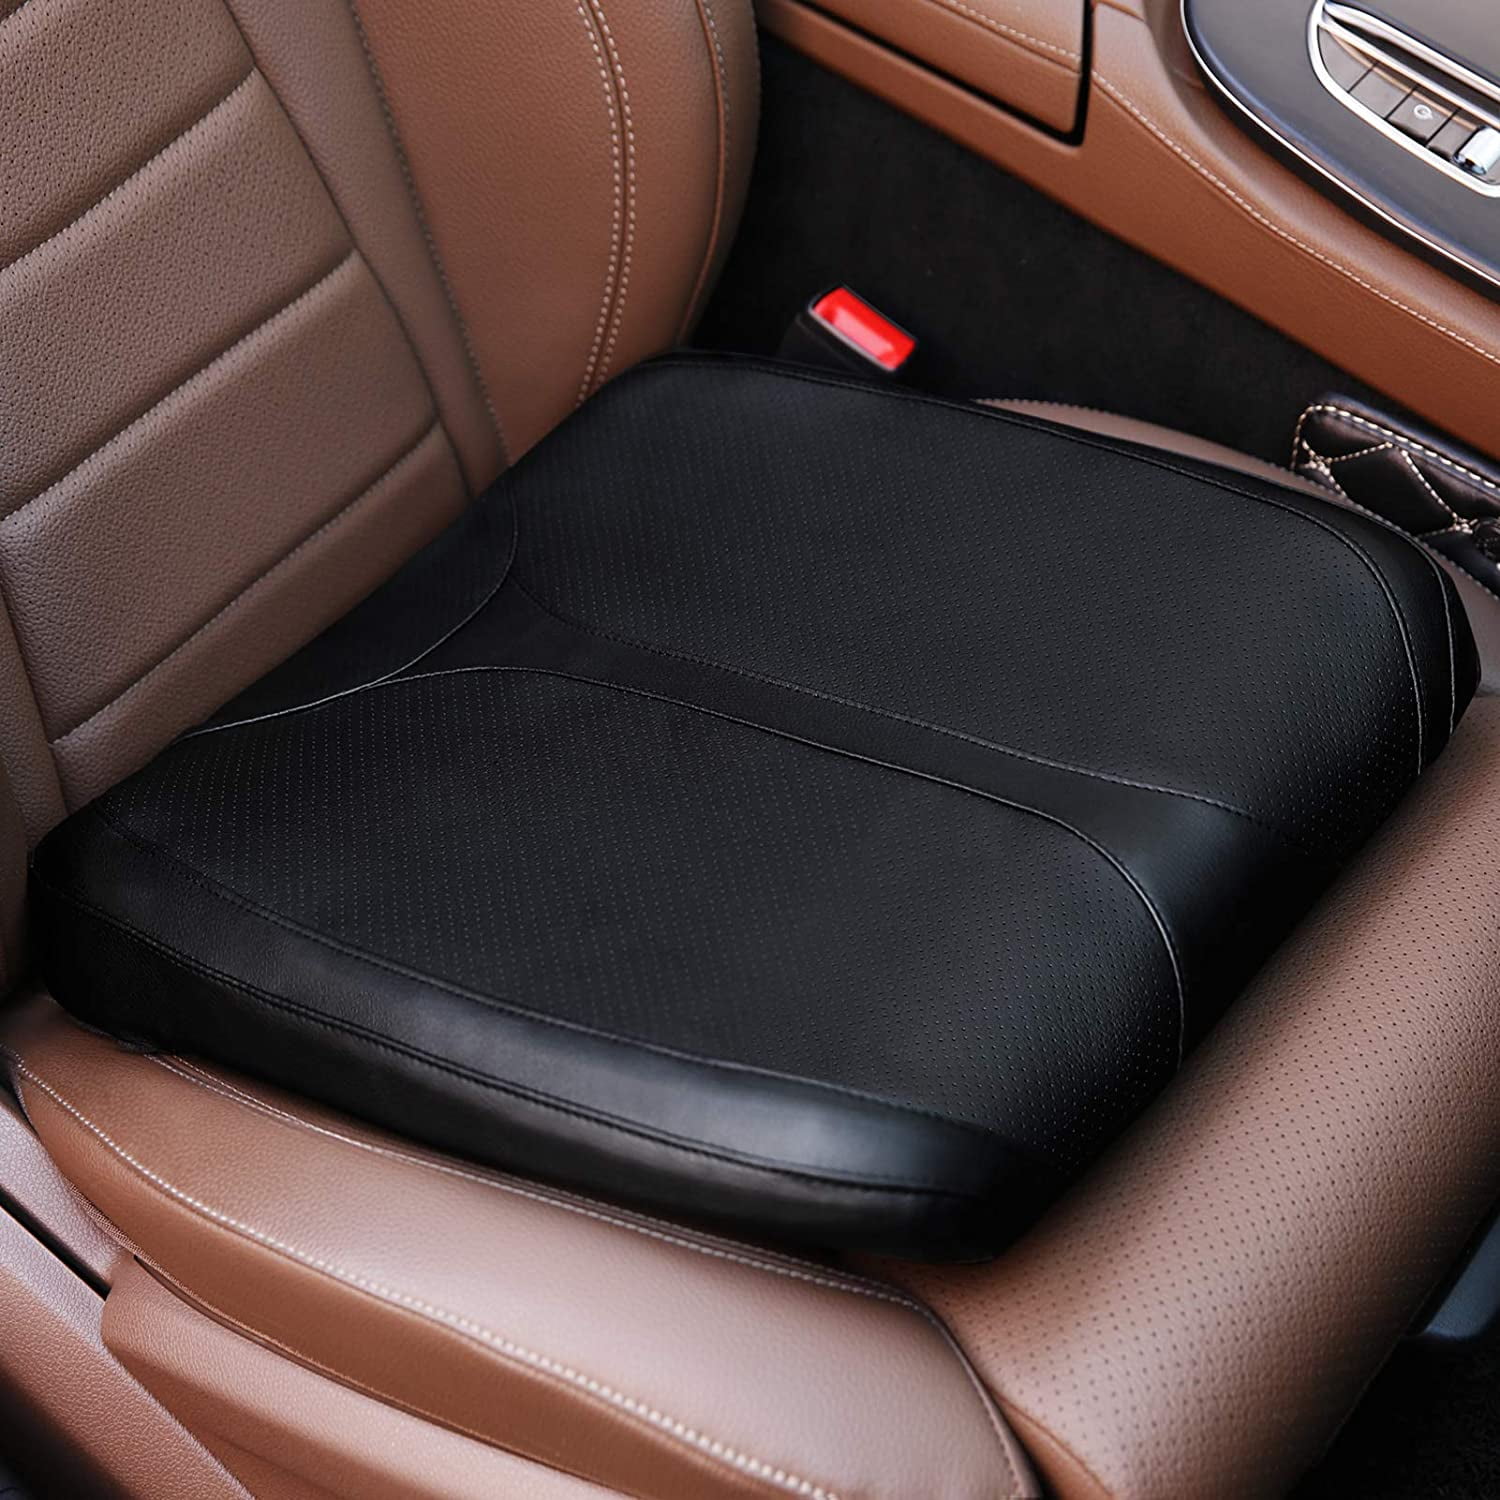 For Drivers Car Memory Foam Car Seat Cushion Pad Sciatica Lower Back Pain  Relief